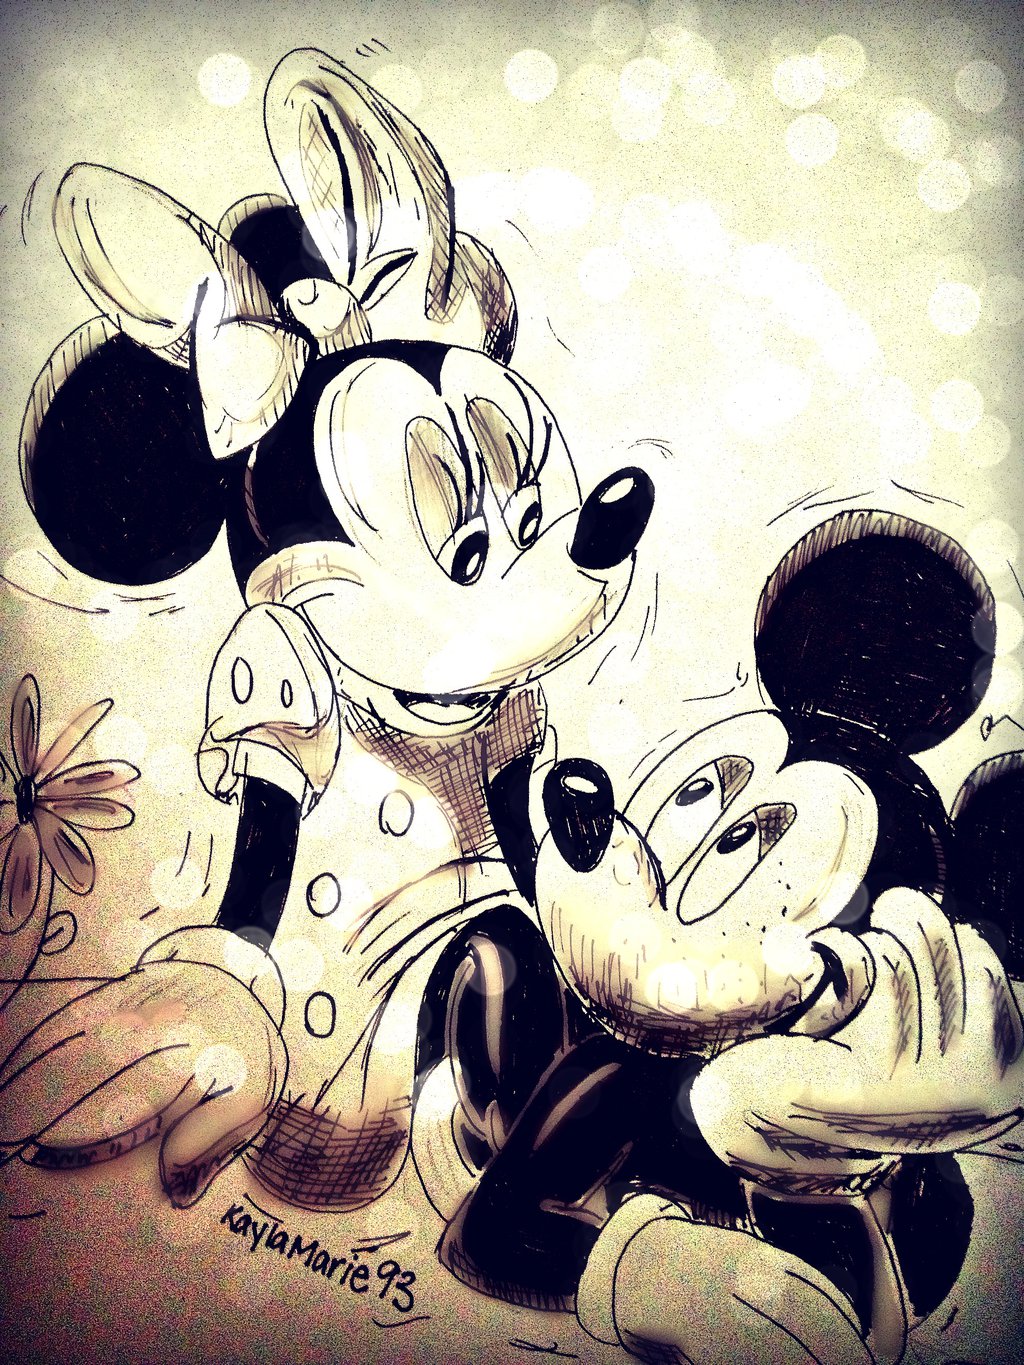 Free Mickey Mouse And Minnie Mouse Love, Download Free ...
 Ghetto Mickey And Minnie Mouse